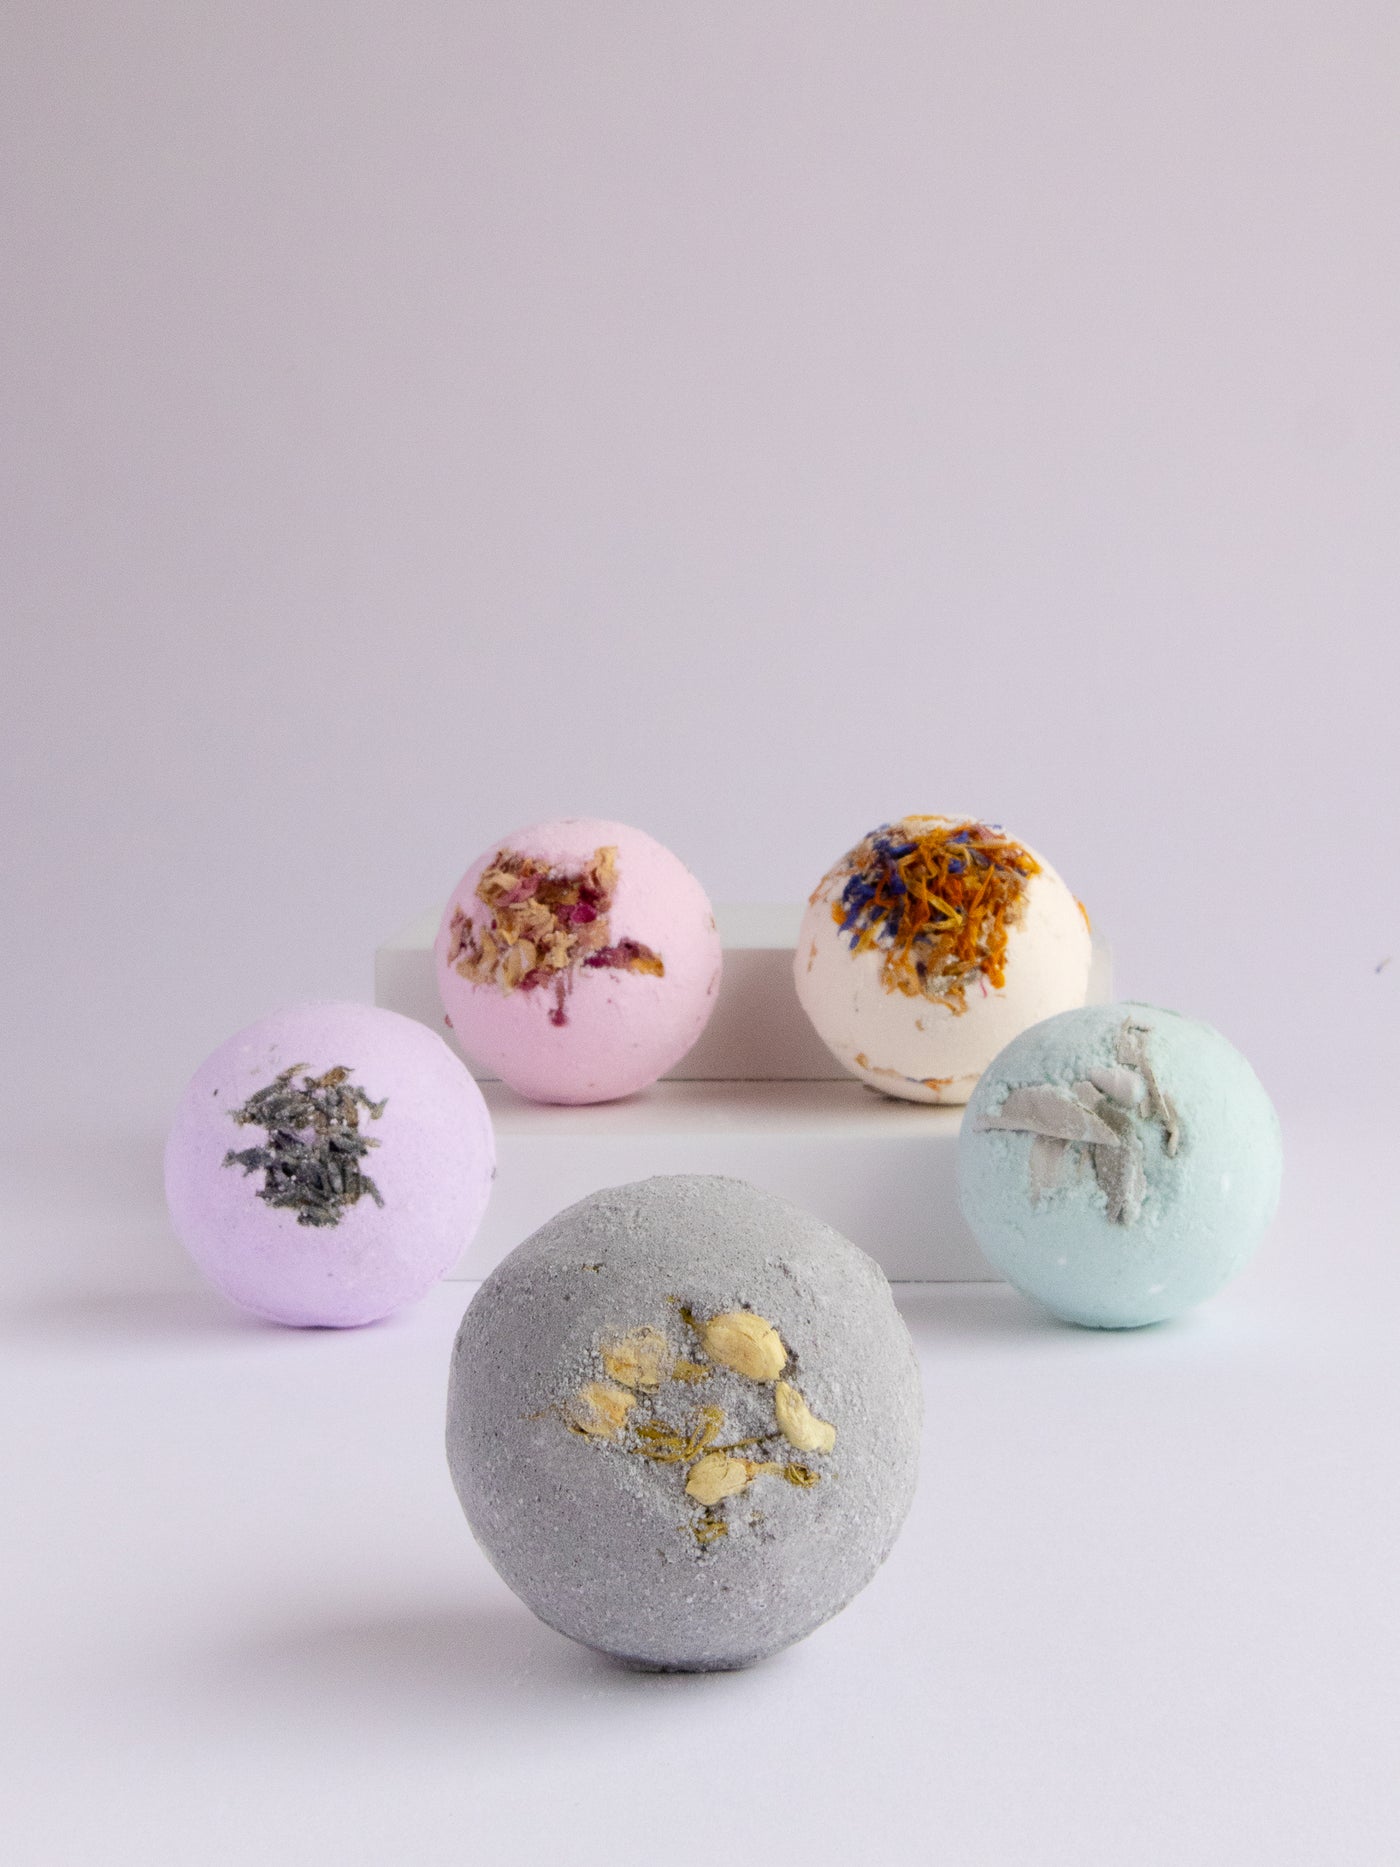 Jasmine Cole bath bomb is made with coconut oil, dried jasmine, and activated charcoal. Handmade in Ojai, CA.